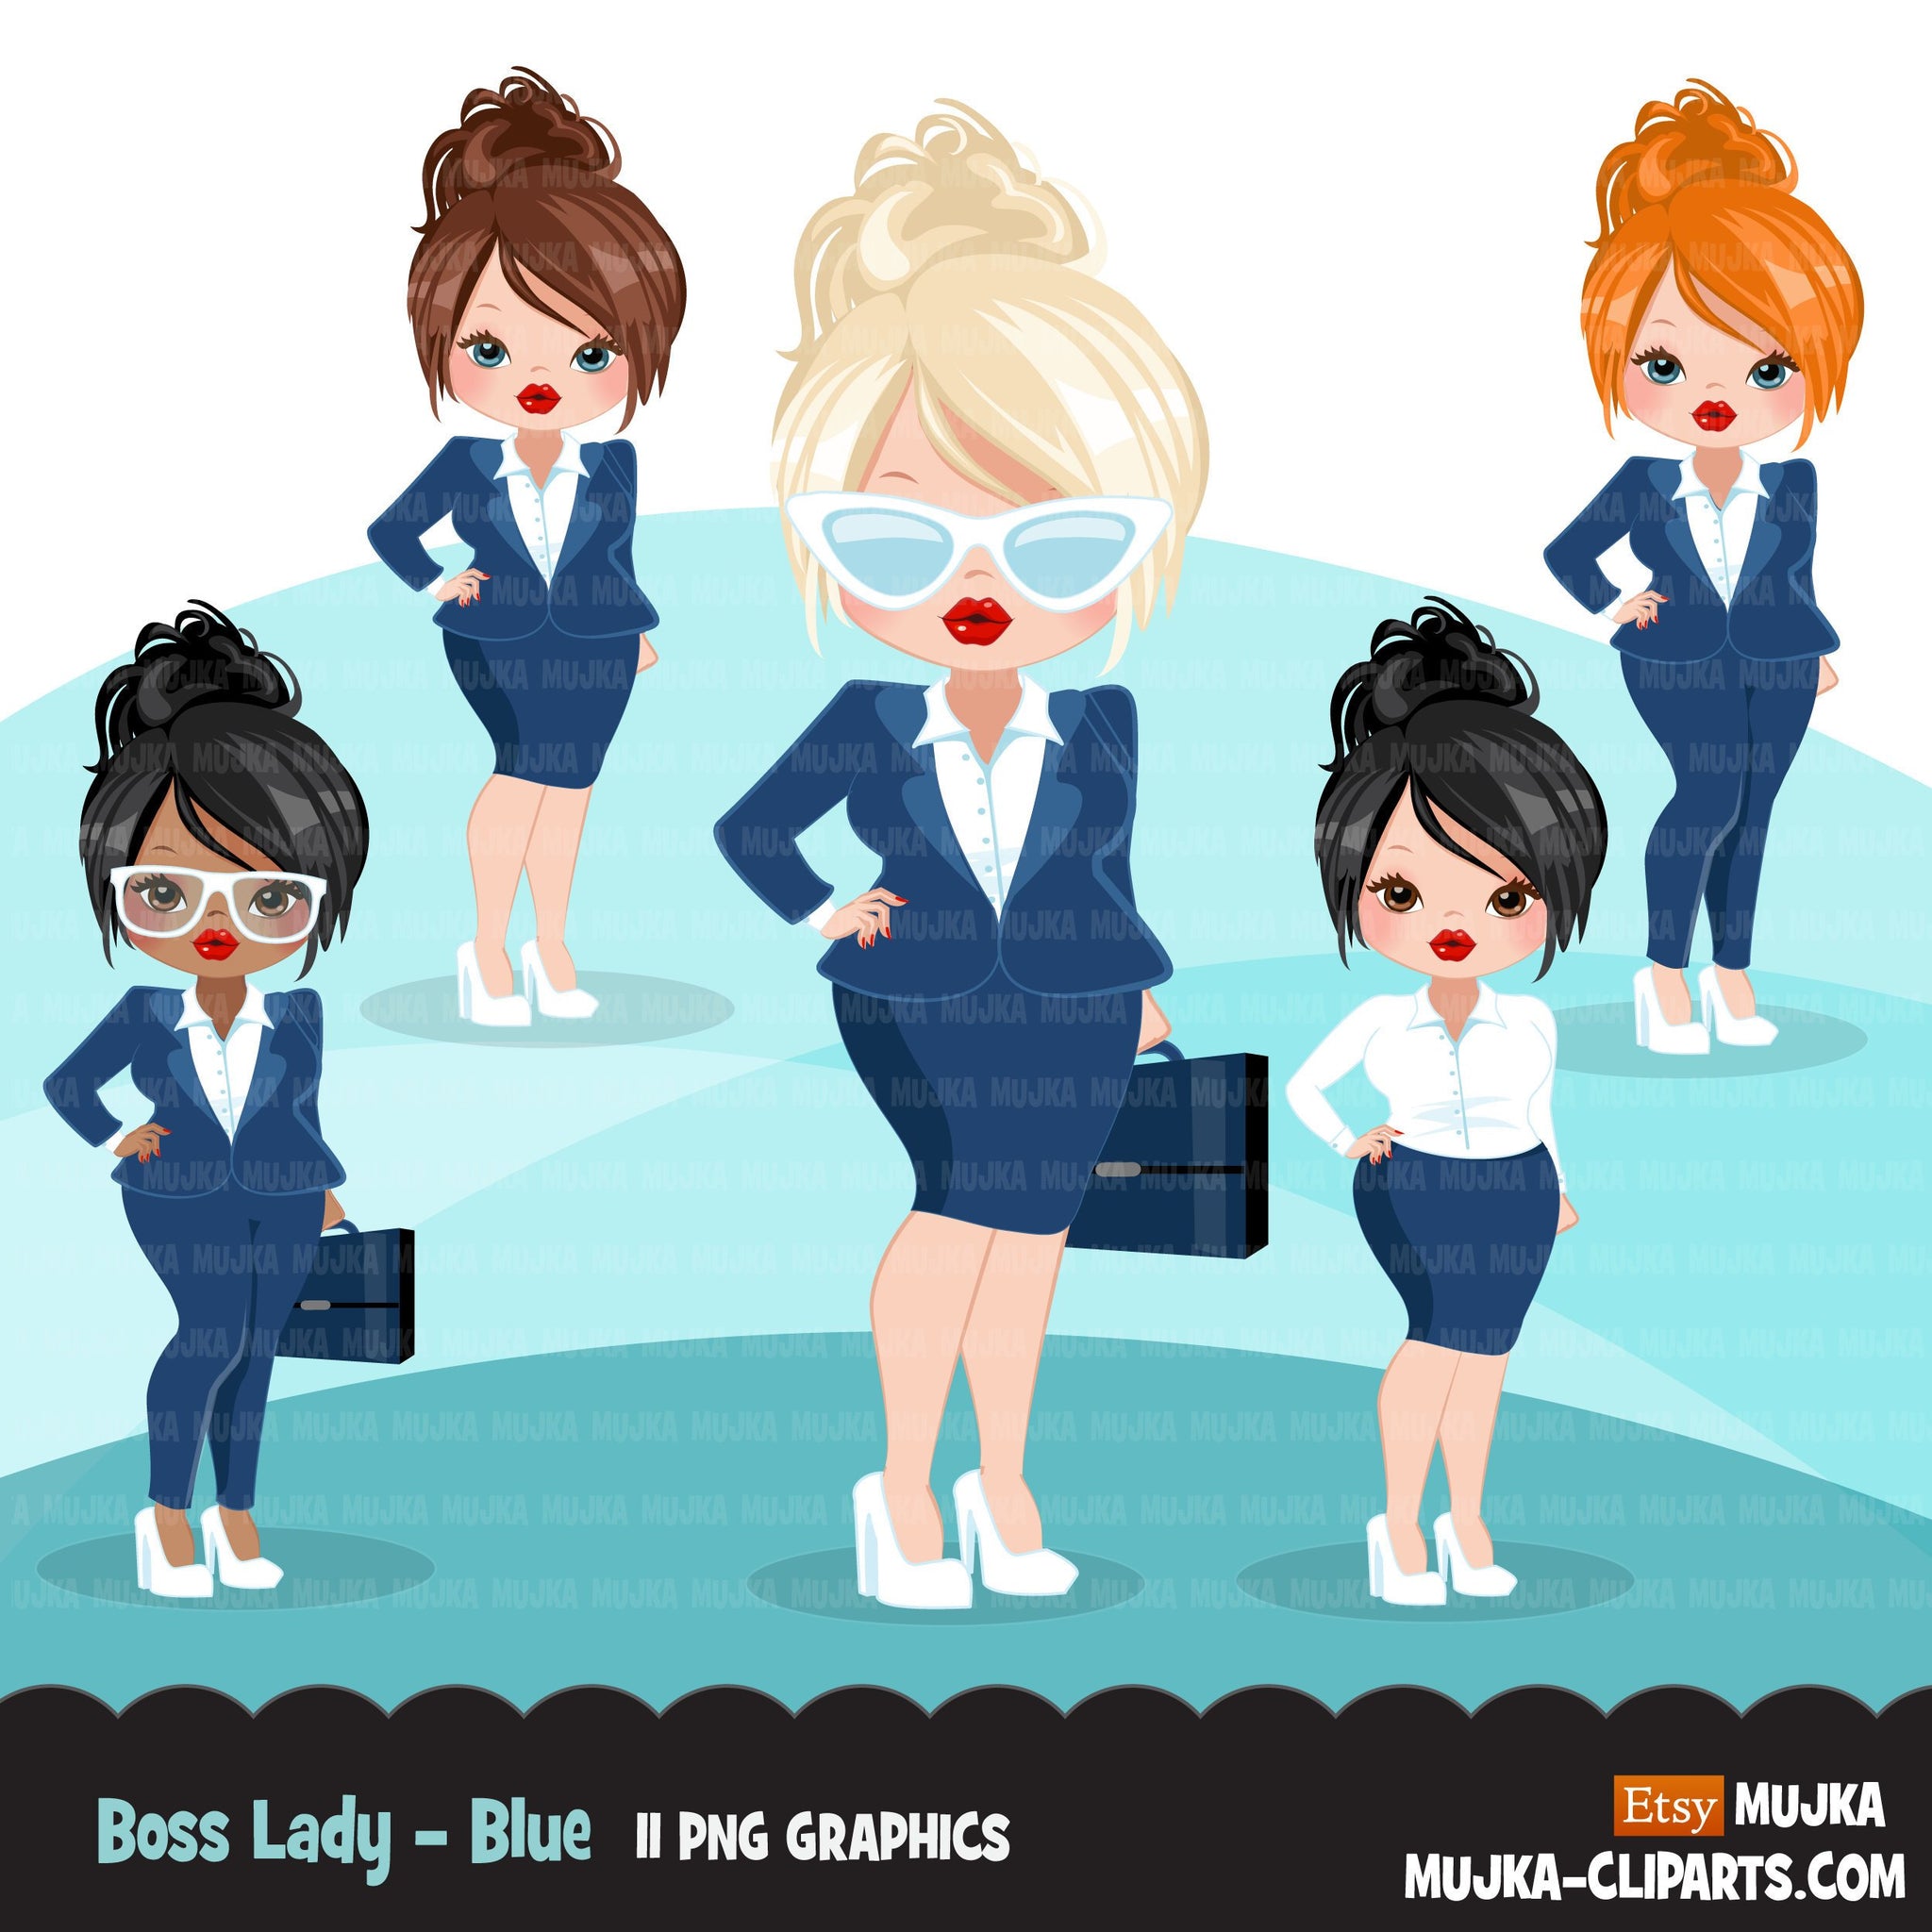 Business woman clipart with navy business suit, briefcase and glasses girl graphics, print and cut sublimation clip art, logo